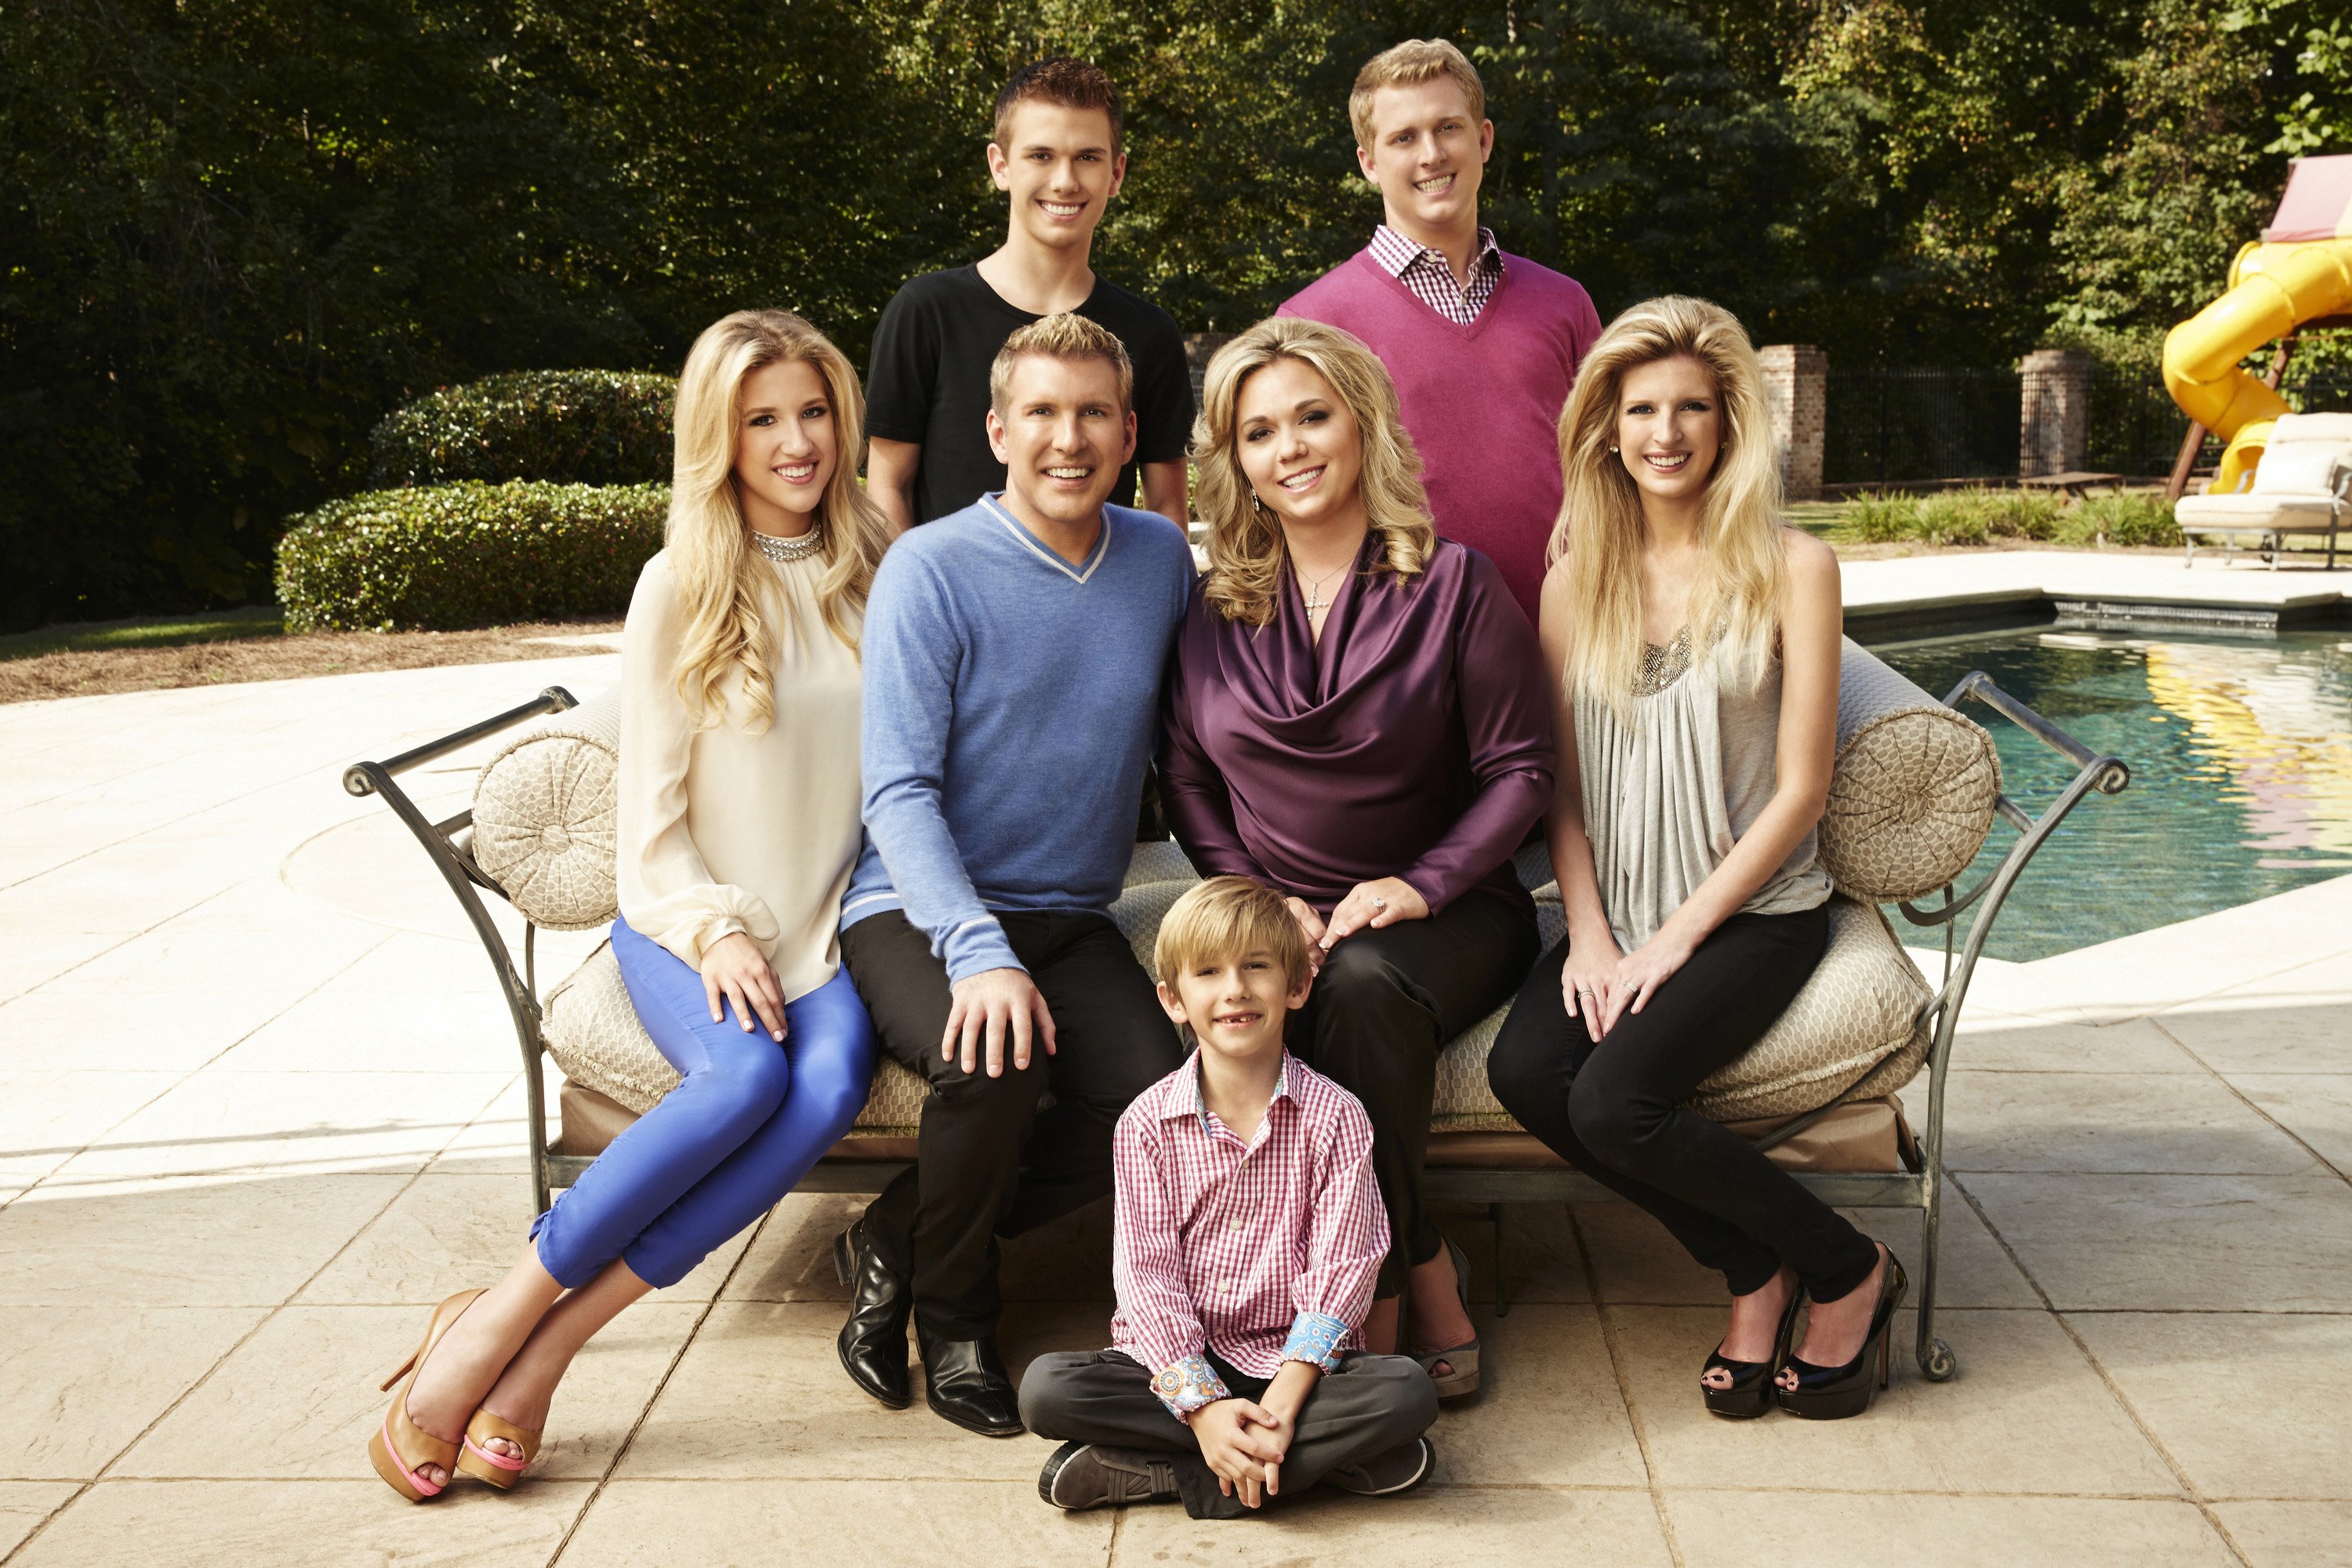 Savannah Chrisley, Todd Chrisley, Chase Chrisley, Grayson Chrisley, Julie Chrisley, Kyle Chrisley, Lindsie Chrisley Campbell on Season One of "Chrisley Knows Best" in October 2013 | Source: Getty Images 